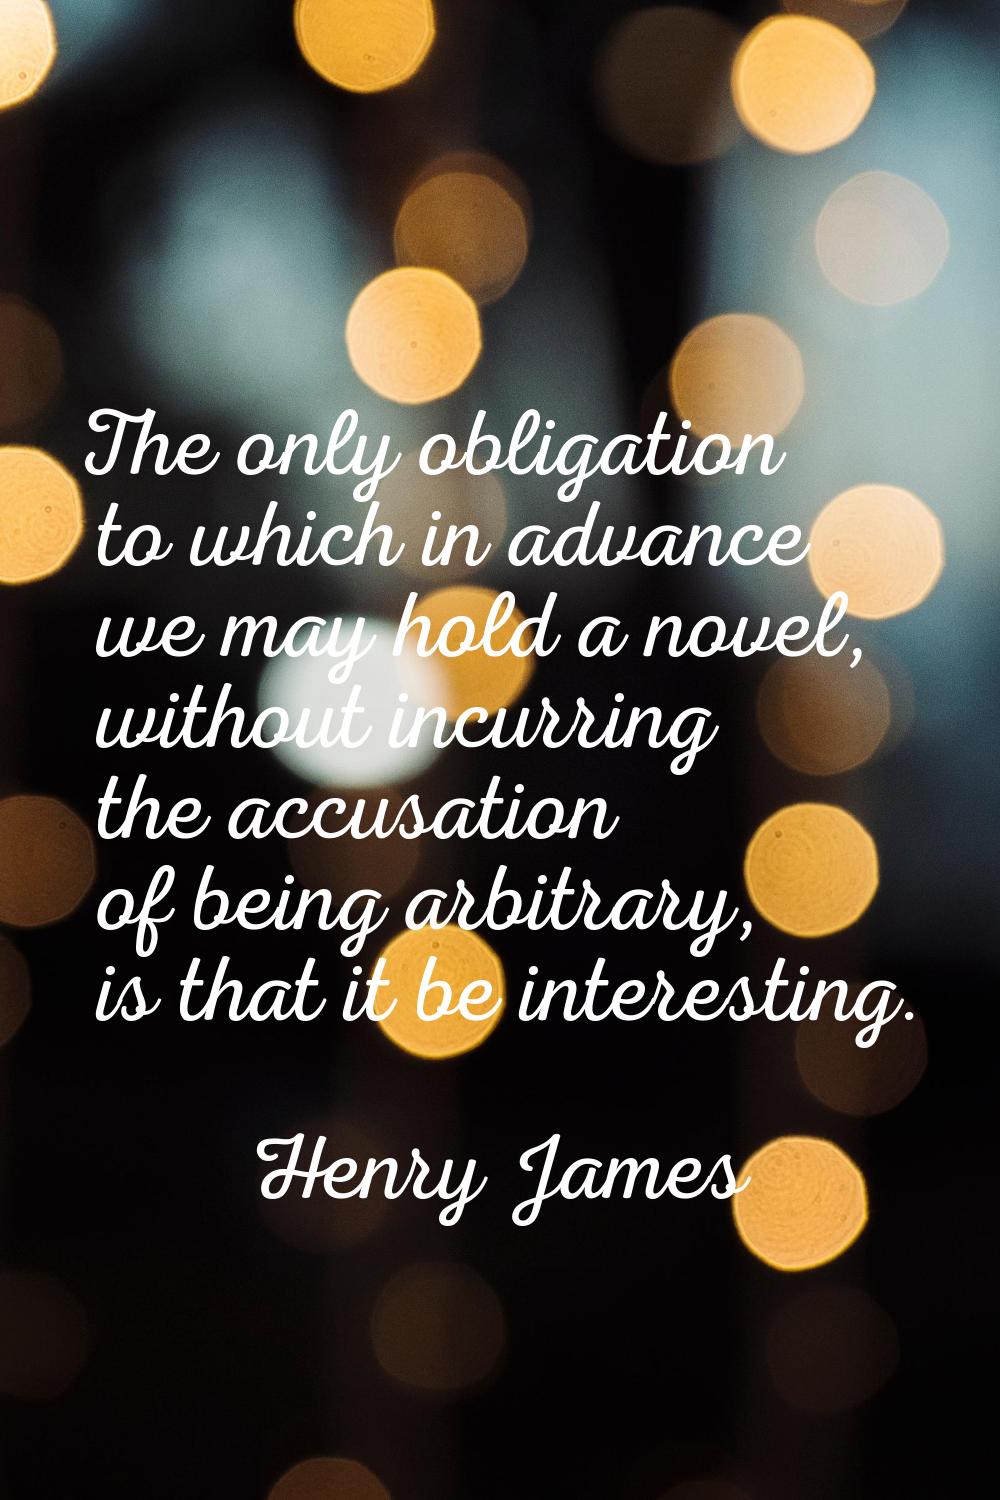 The only obligation to which in advance we may hold a novel, without incurring the accusation of be